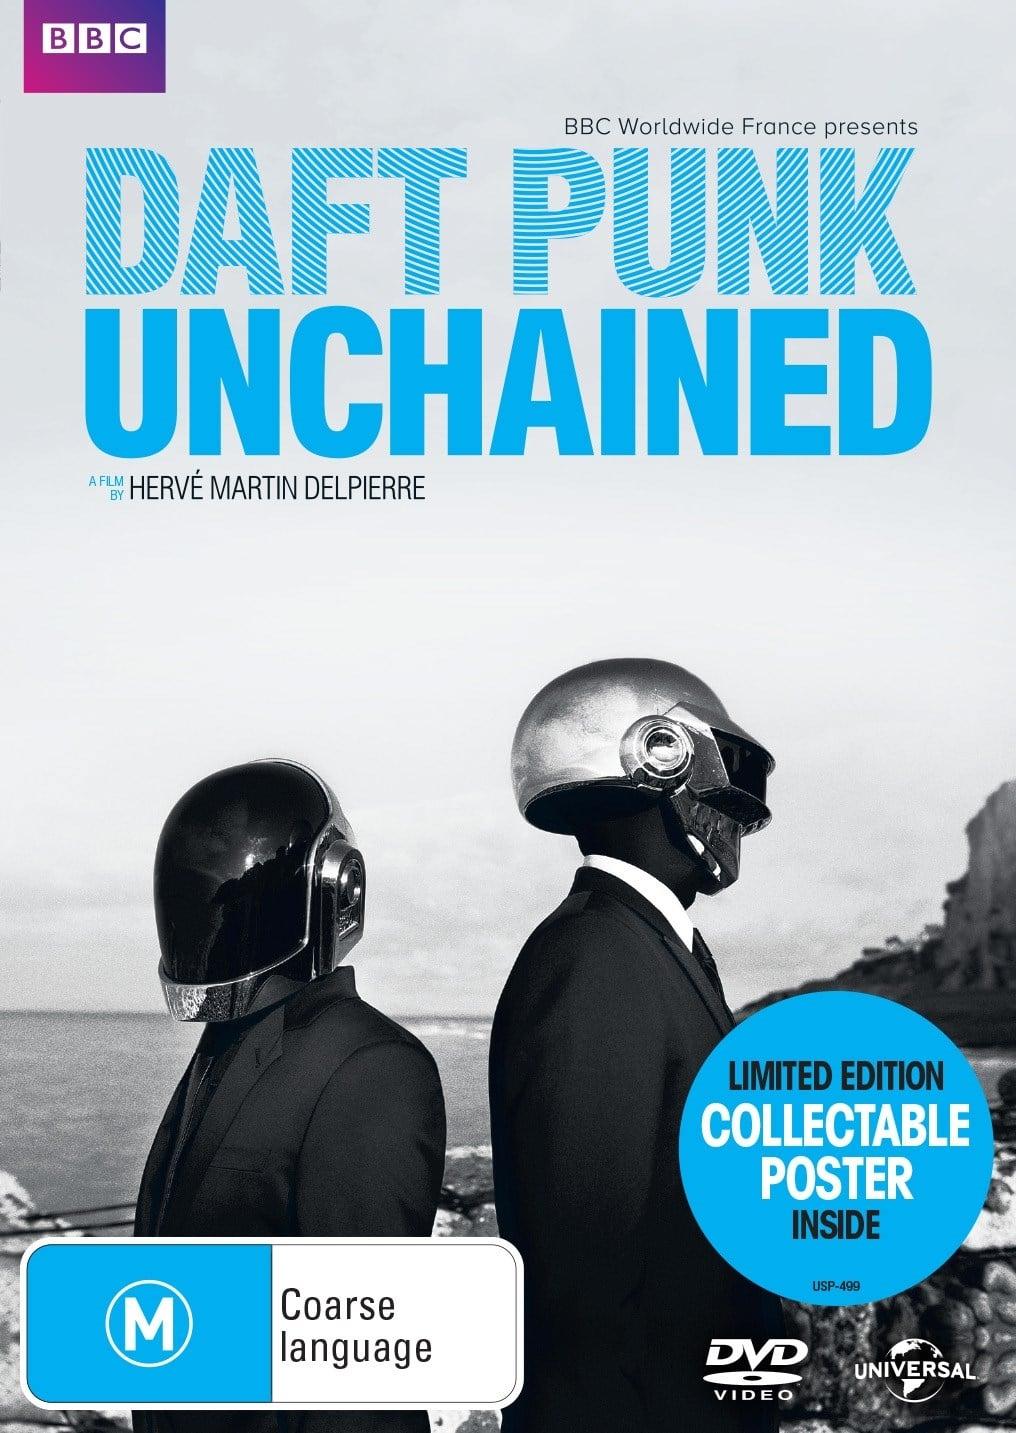 Daft Punk Unchained poster